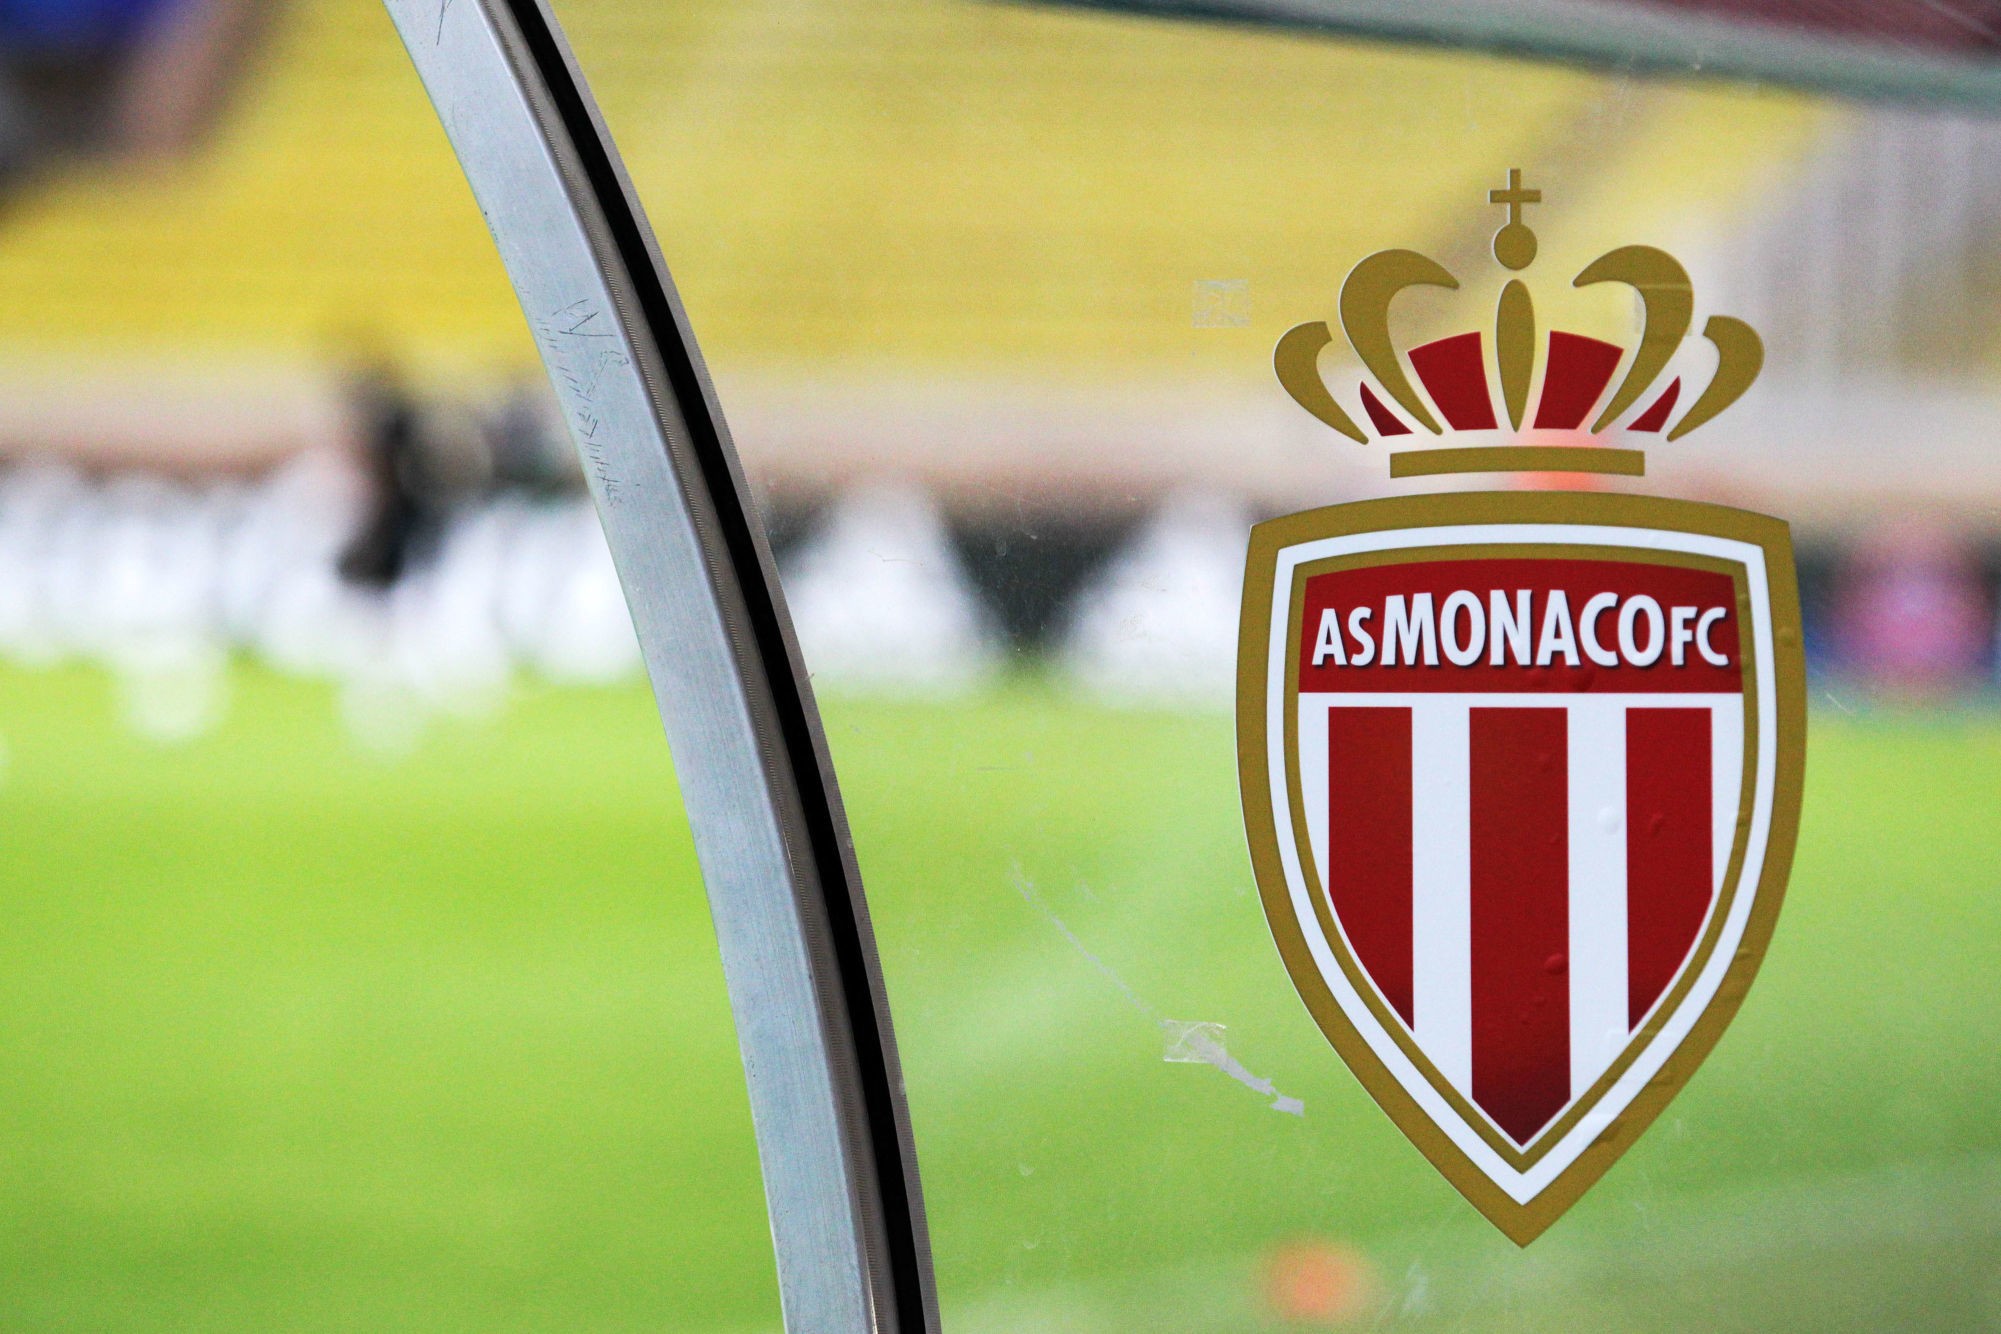 MONACO, MONACO - AUGUST 23: Detail view of AS Monaco logo during the UEFA Champions League game between As Monaco and Villarreal at Stade Louis II on August 23, 2016 in Monaco, Monaco. (Photo by Agenc